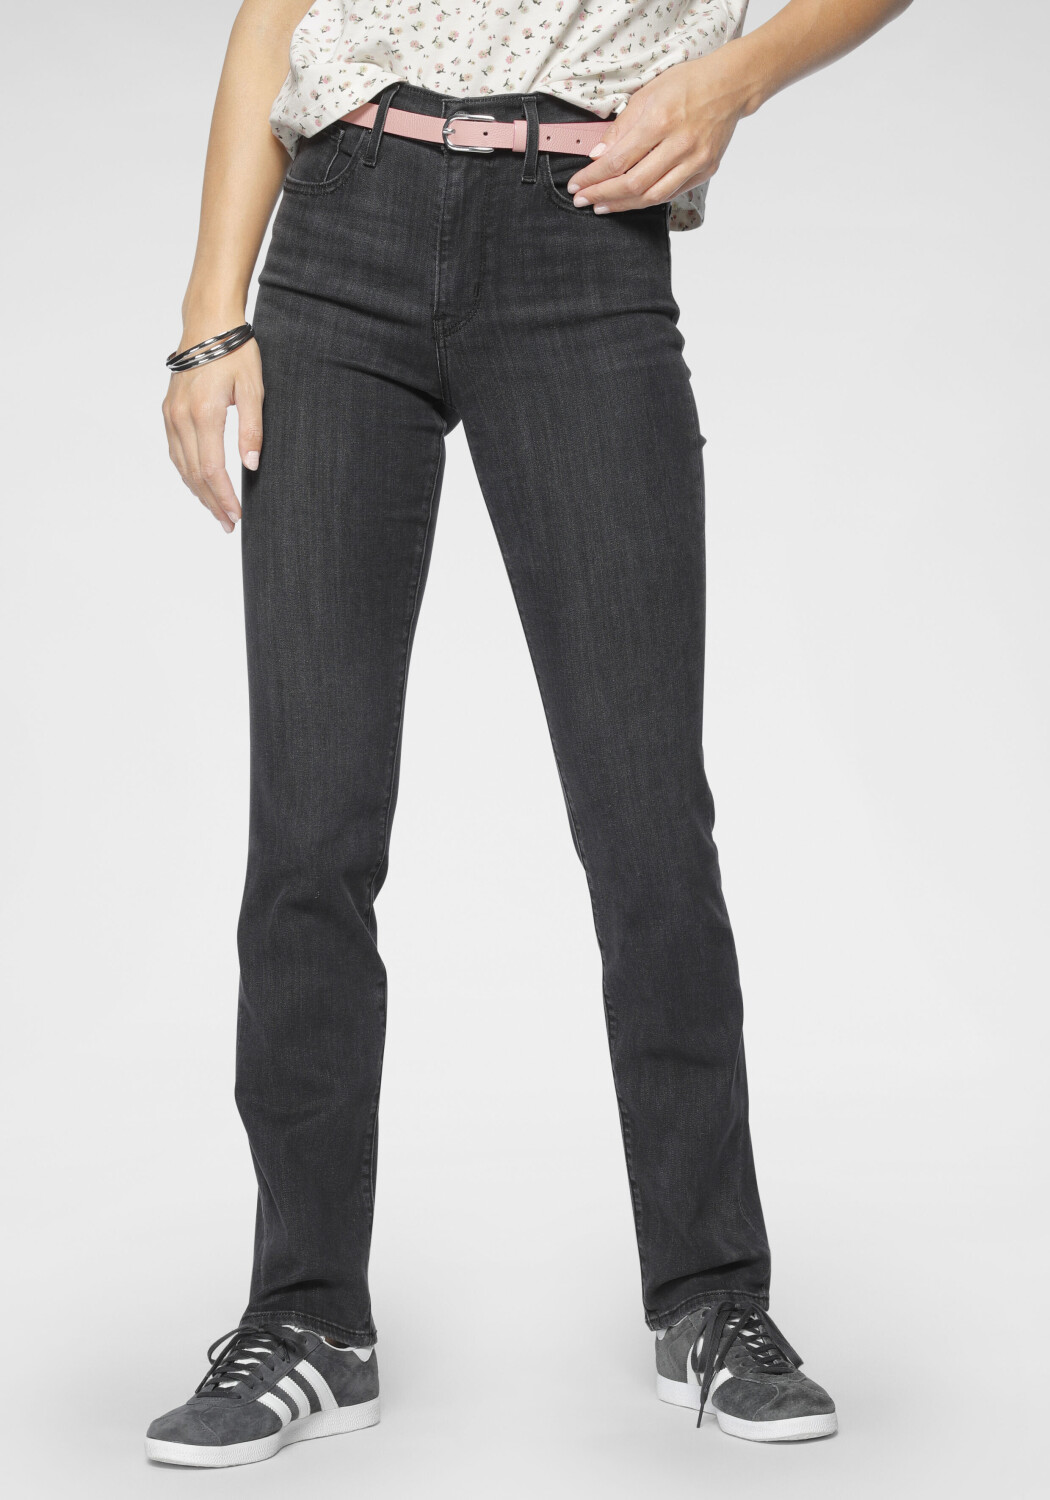 Buy Levi's 724 High Rise Straight Jeans black hail from £29.44 (Today) – Best  Deals on